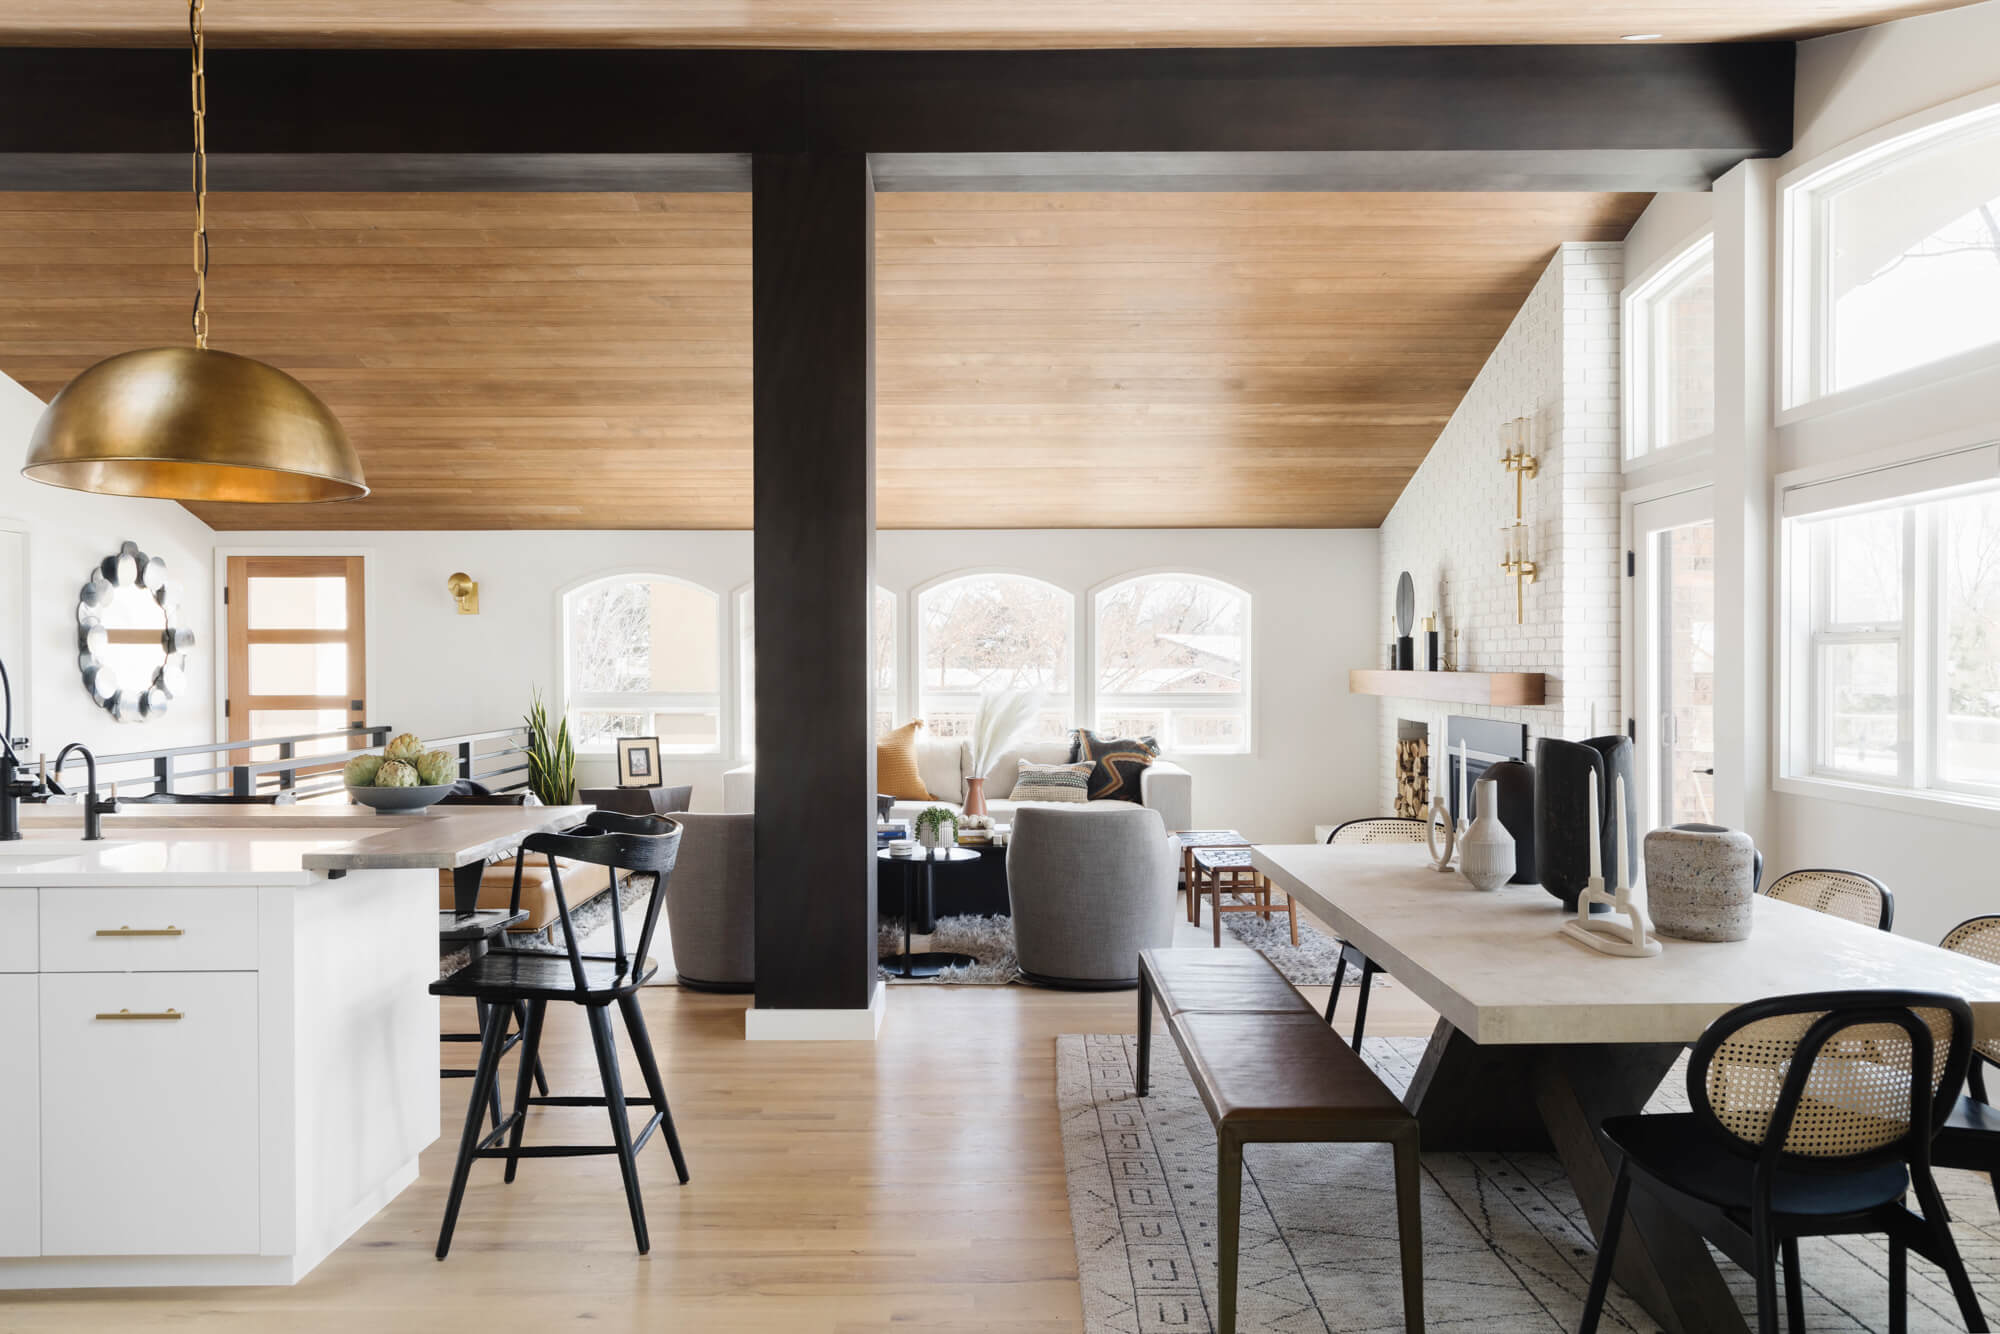 An updated 1970s home featuring wood flooring, a wood paneled ceiling, black beams and other mid-century modern inspired elements.